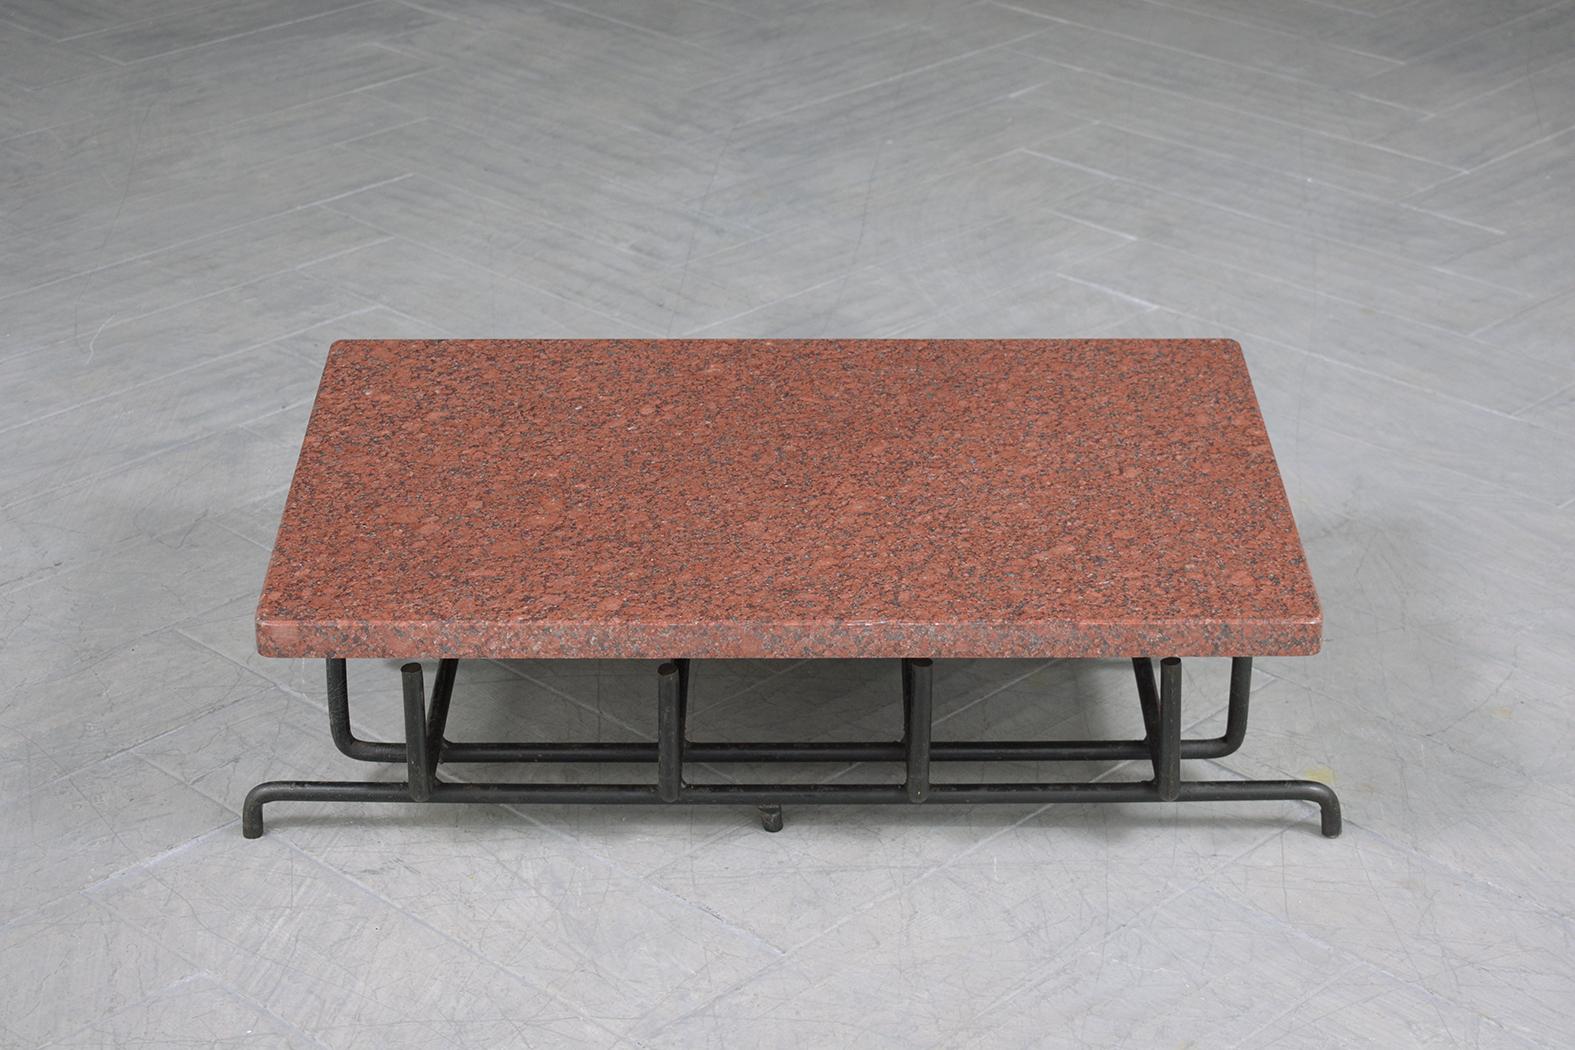 Experience the elegance of vintage design with our low coffee table, a unique piece that beautifully combines natural materials with artisanal craftsmanship. Expertly constructed, this table features a top made from exquisite red African ivory